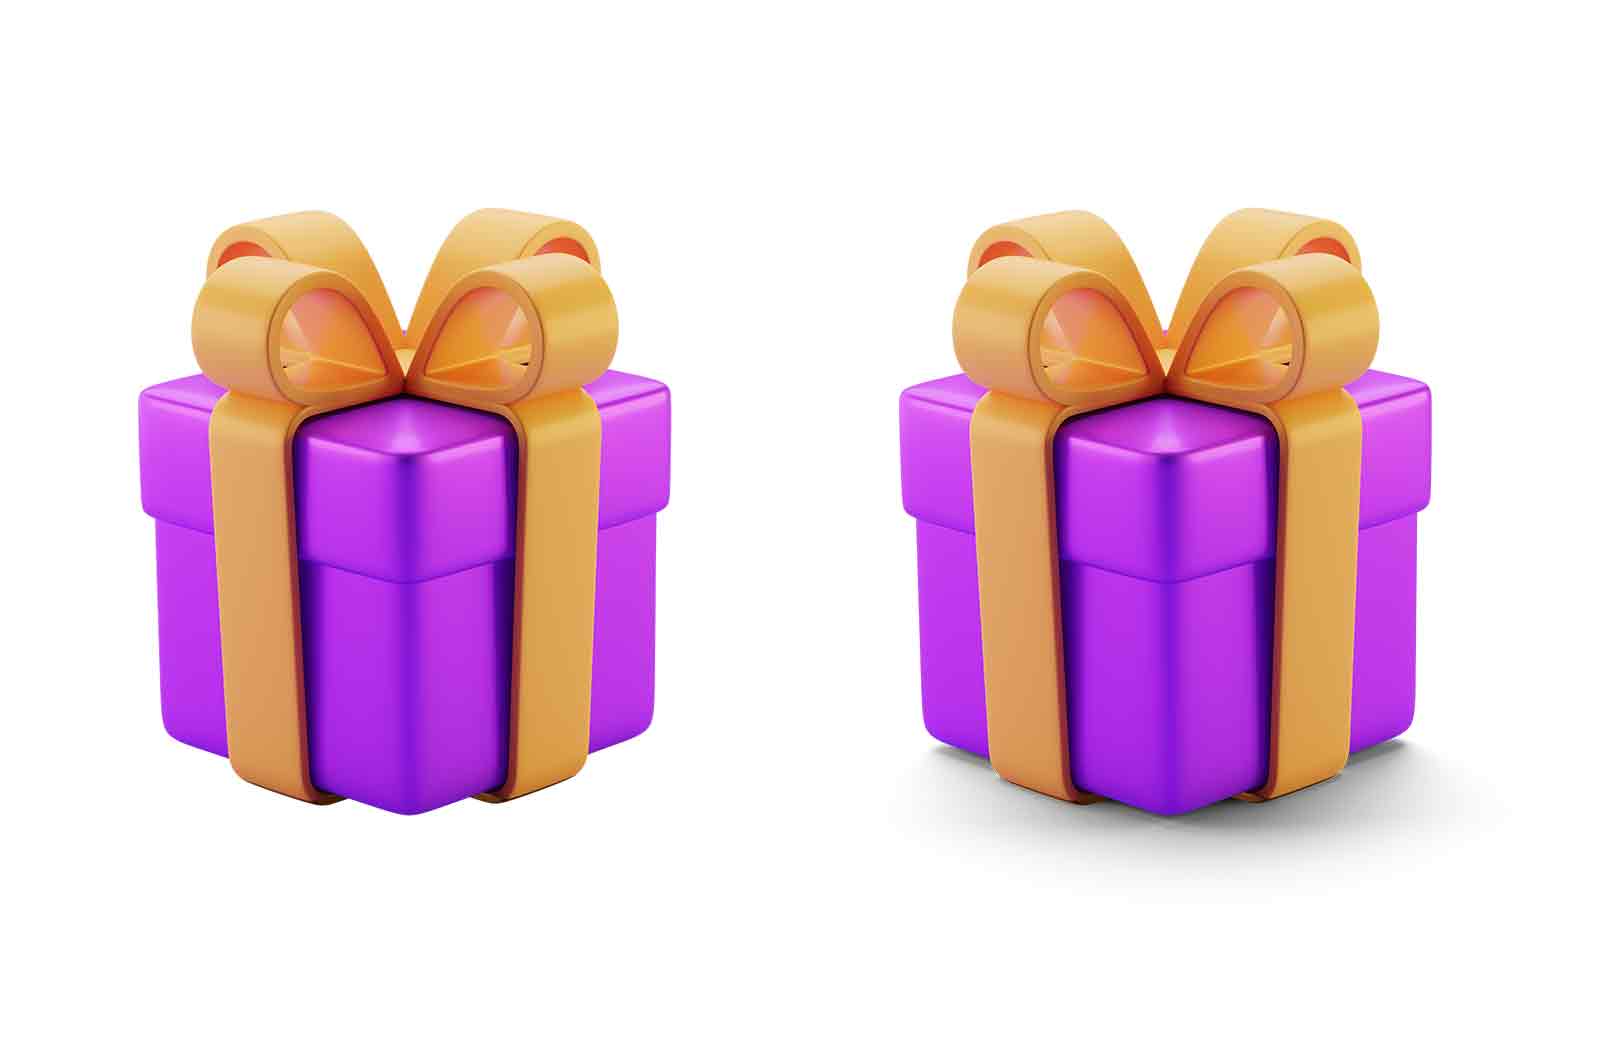 Closed gift box 3d rendered icon illustration. Violet holiday surprise box with yellow ribbon bow. Holiday sale or birthday celebration